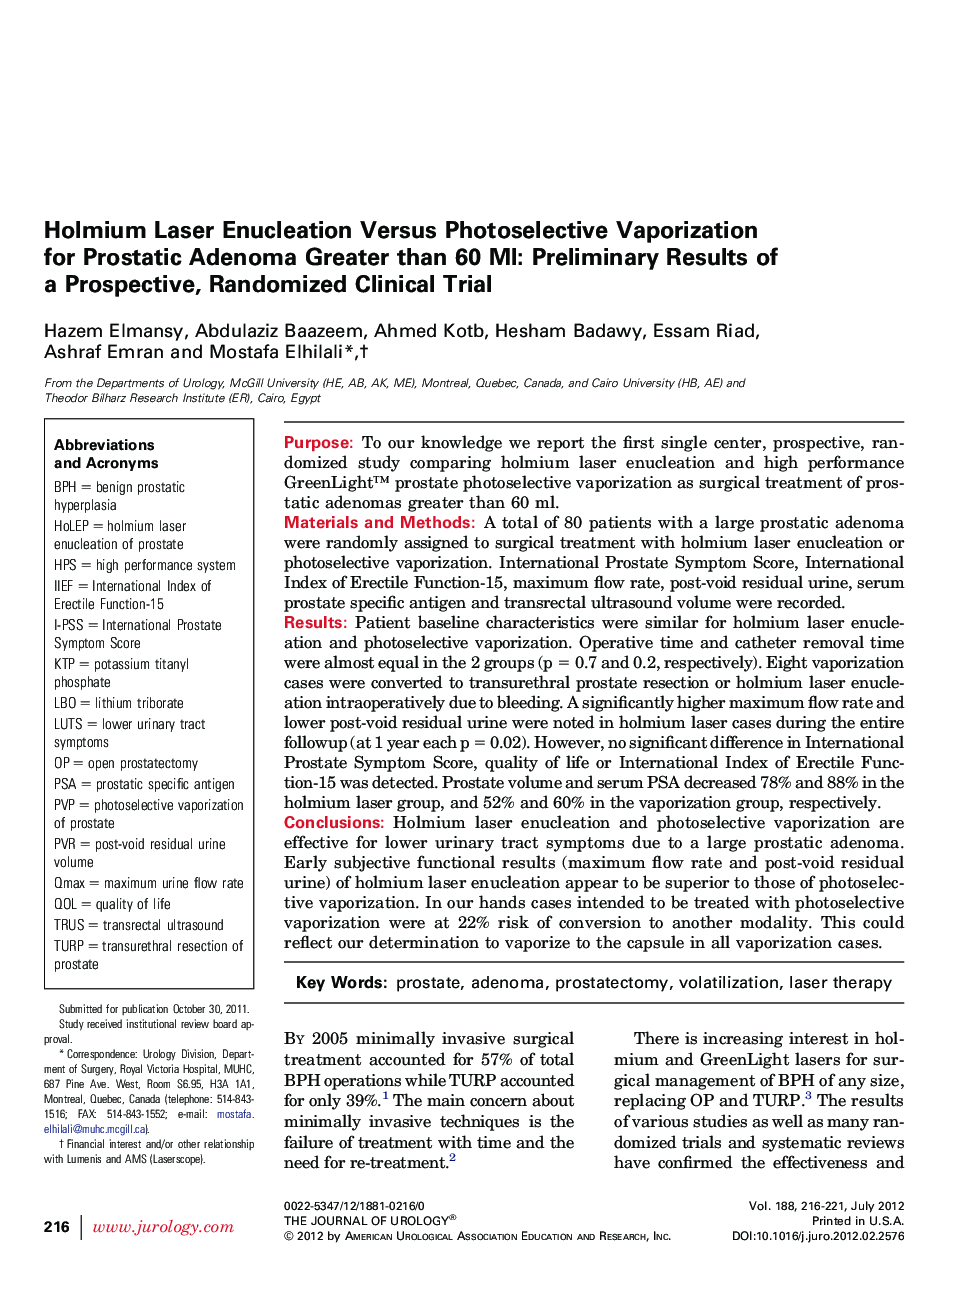 Holmium Laser Enucleation Versus Photoselective Vaporization for Prostatic Adenoma Greater than 60 Ml: Preliminary Results of a Prospective, Randomized Clinical Trial 